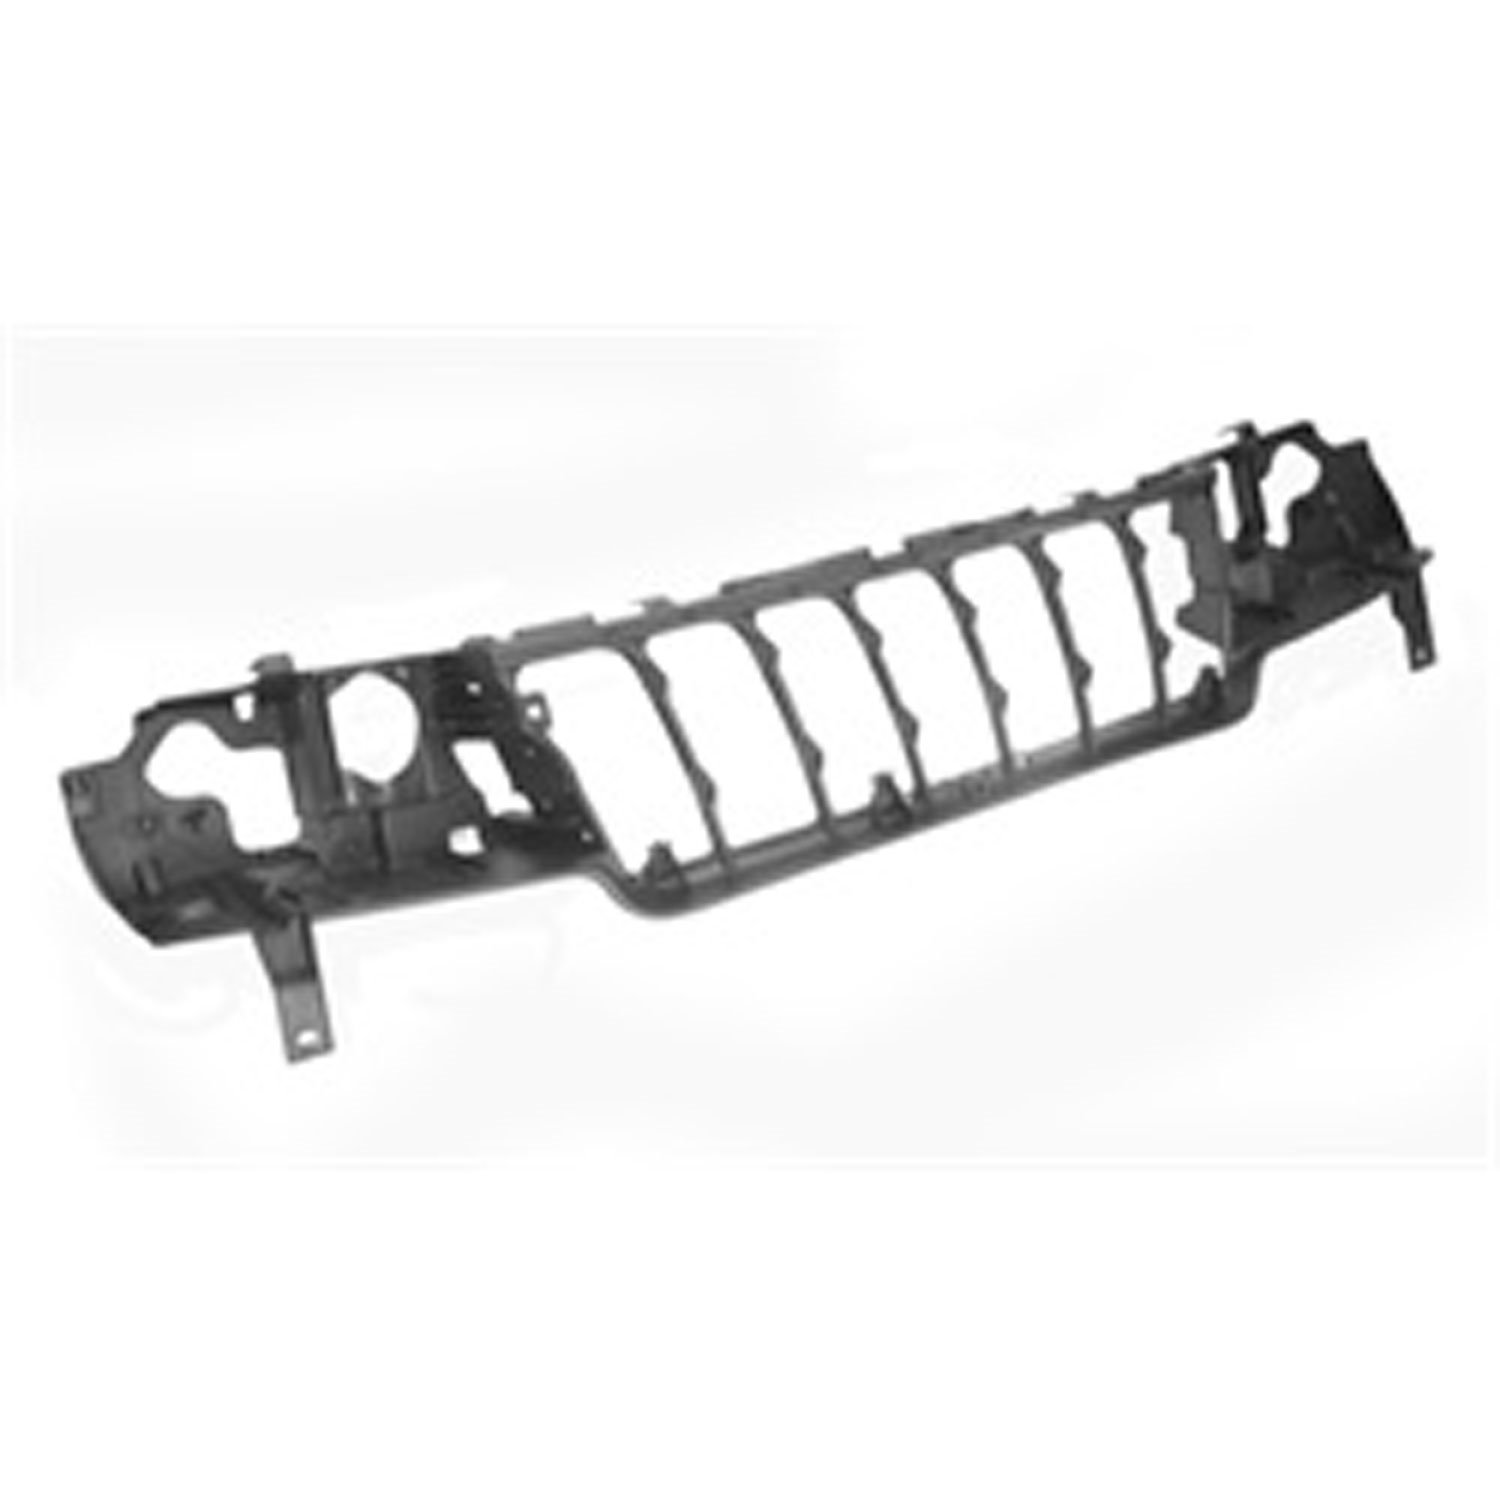 This grille support from Omix-ADA fits 99-03 Jeep Grand Cherokee WJ.